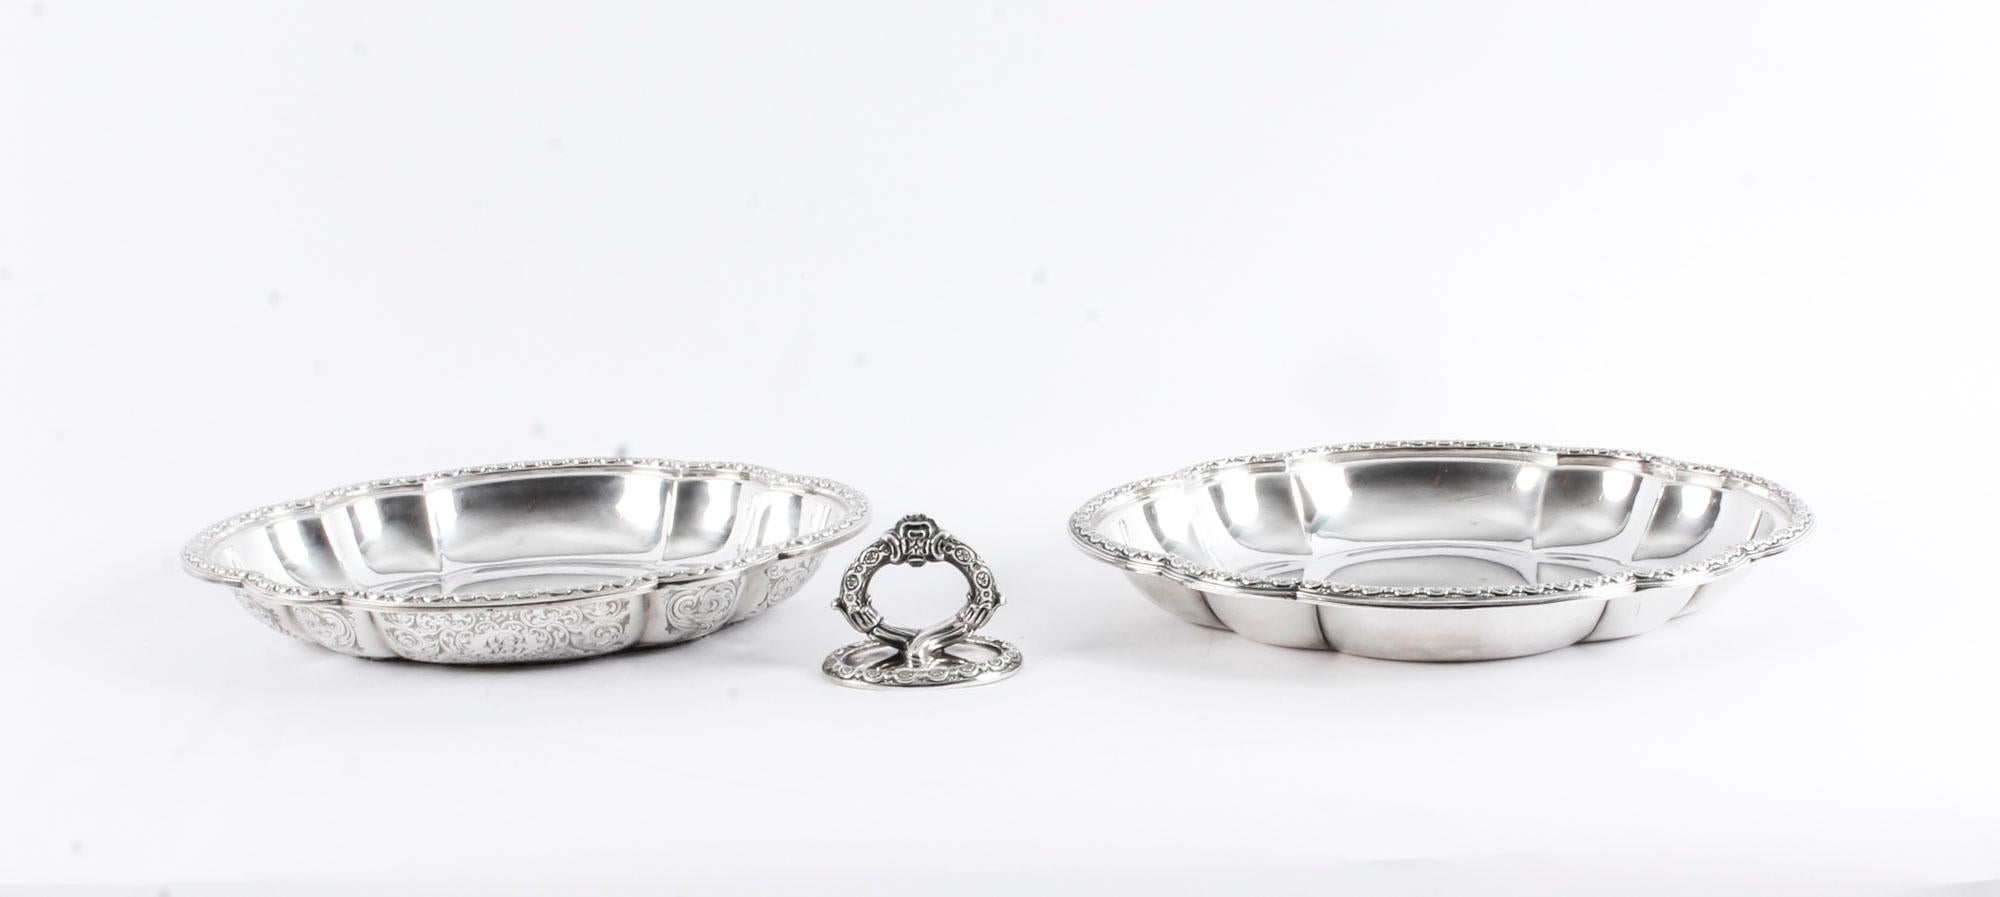 Silver Plate Antique Victorian Tureen Entree Dish by Collins and Co. London, 19th Century